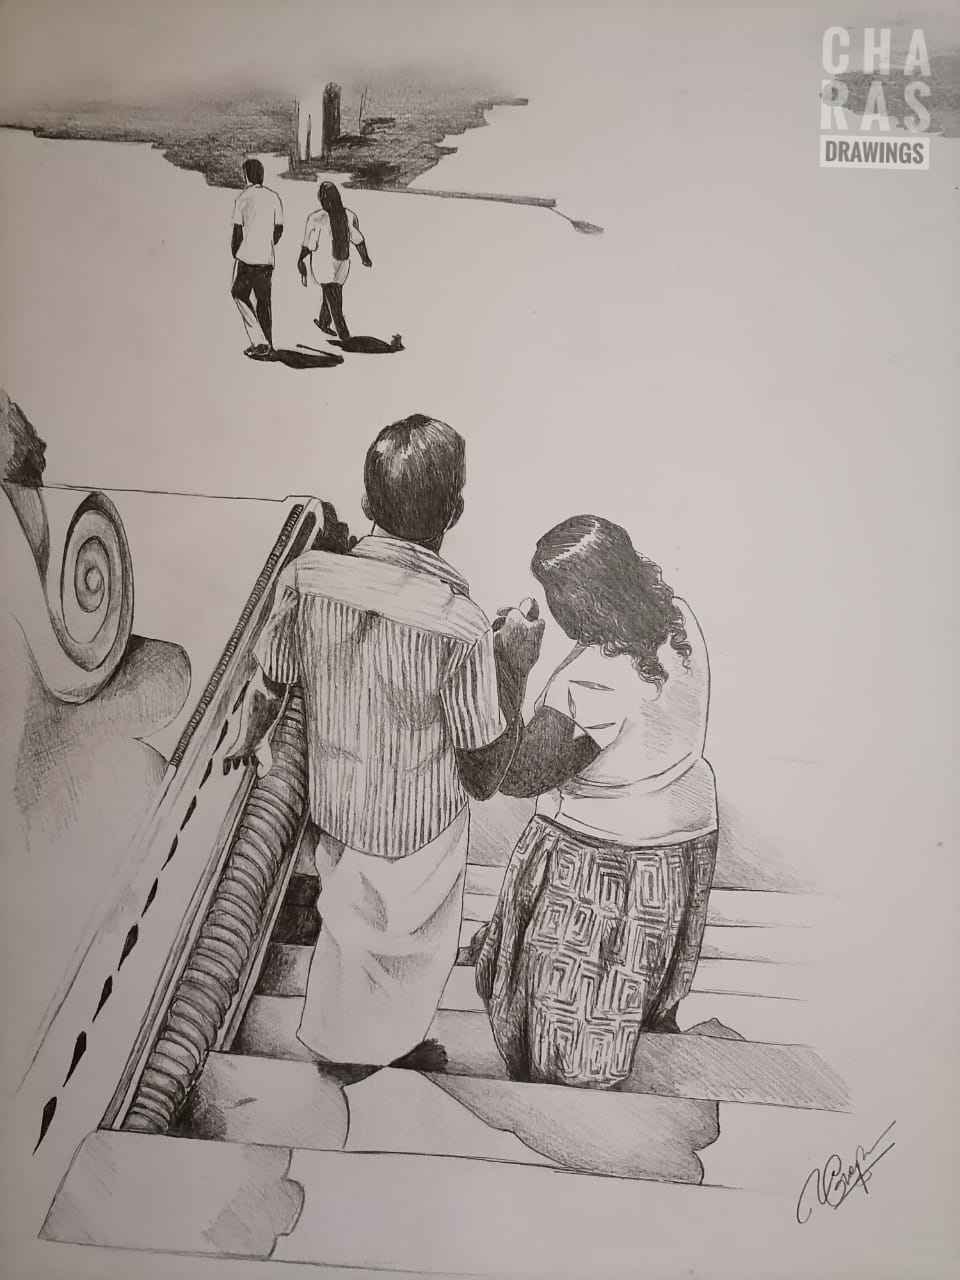 nisha_arts - I know it doesn't come out well🤐 bt i love the concept❤ #mom  #momlove #momlife #amma #pencildrawing #pencilsketch #pencilsketch #love  #art #artist #drawing #artists #ink #artlovers #instaartoftheday #sketch  #myart #creative #